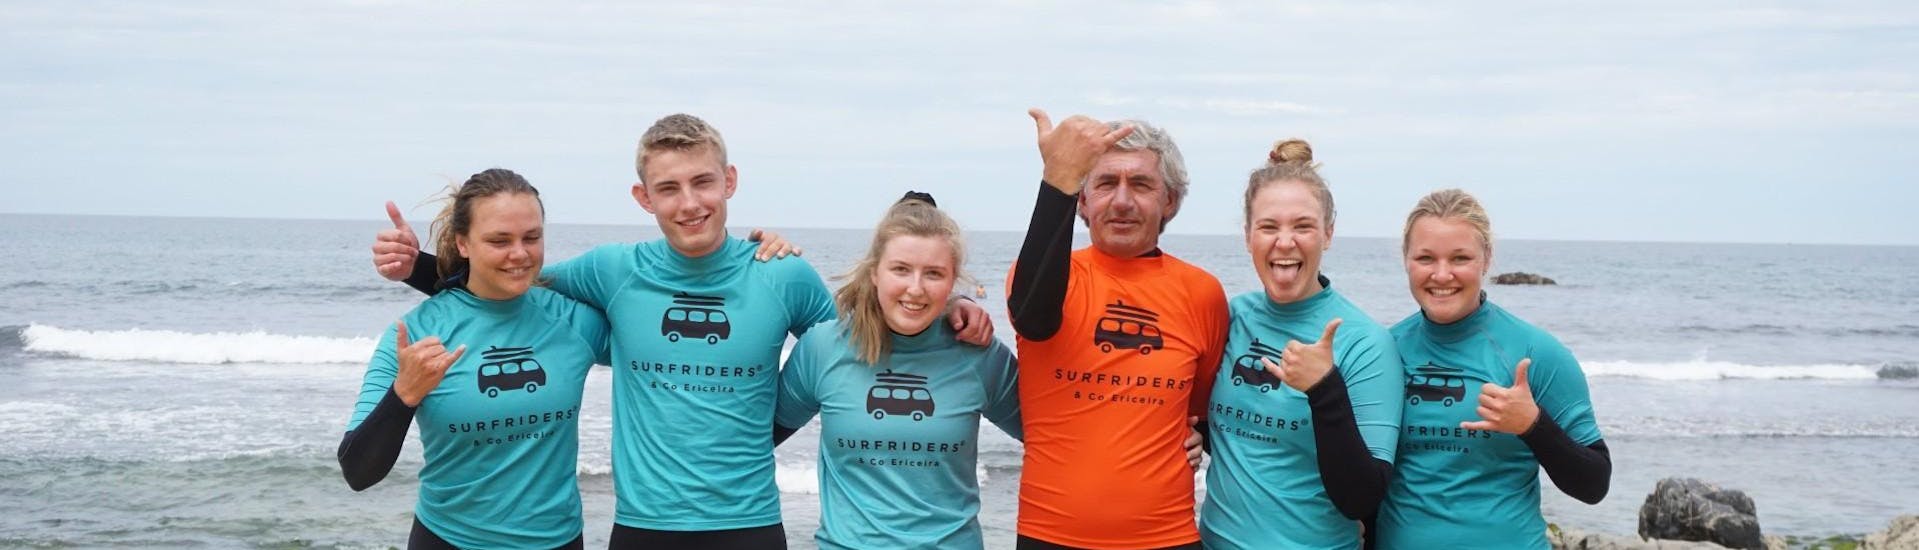 Our surfers are smiling during the Surf Week in Ericeira for Adult Beginners with Surf Riders Ericeira.